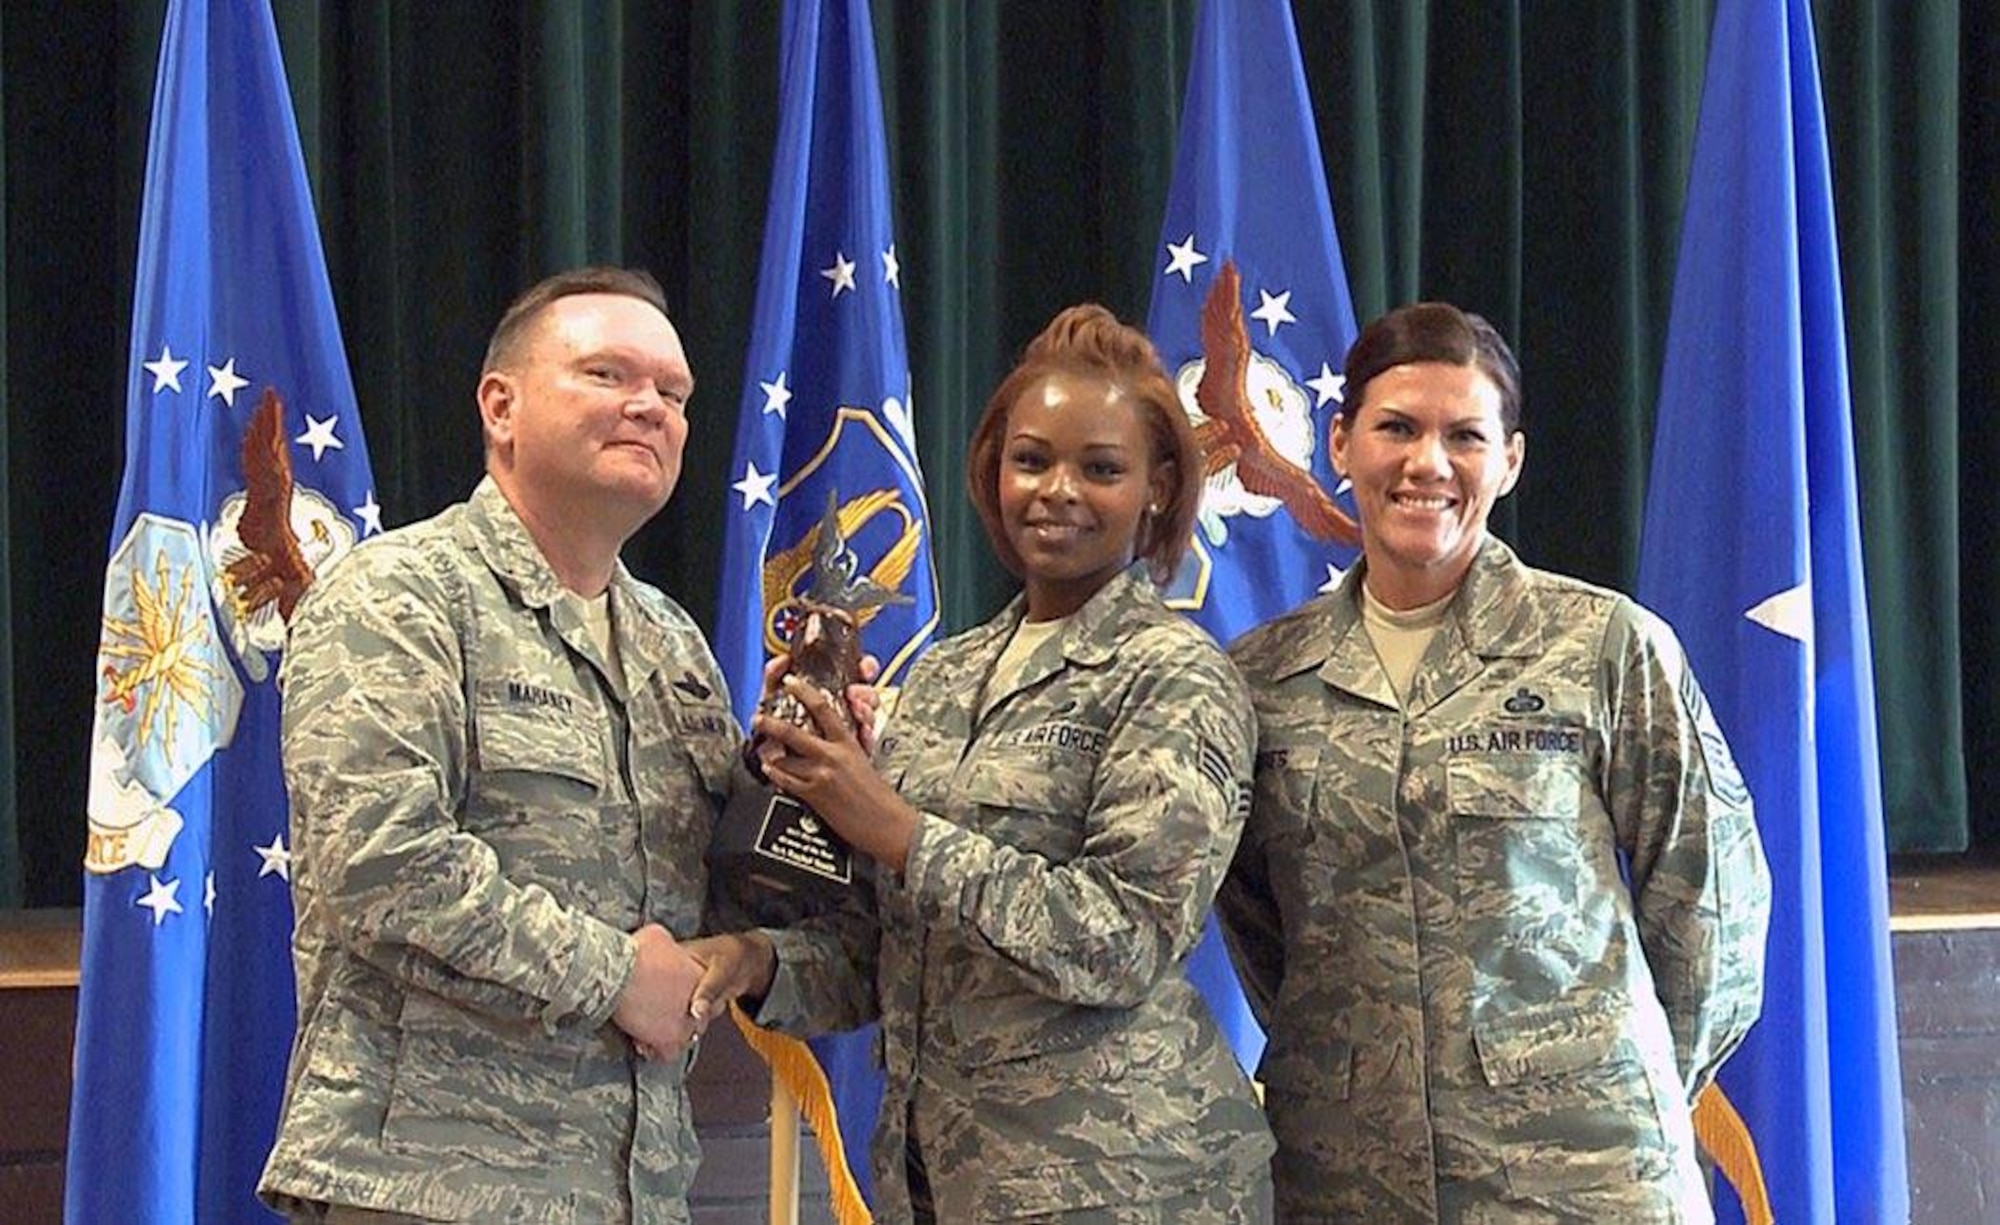 Brig. Gen. Samuel “Bo” Mahaney, Air Reserve Personnel Center commander, and Chief Master Sgt. Ruthe Flores, ARPC command chief, present the ARPC Airman of the Year award to Senior Airman Rachel Smith. Mahaney honored ARPC’s 2015 outstanding performers of the year Feb. 16, 2016, at the Heritage Eagle Bend Country Club in Aurora, Colo. (U.S. Air Force photo/Quinn Jacobson)